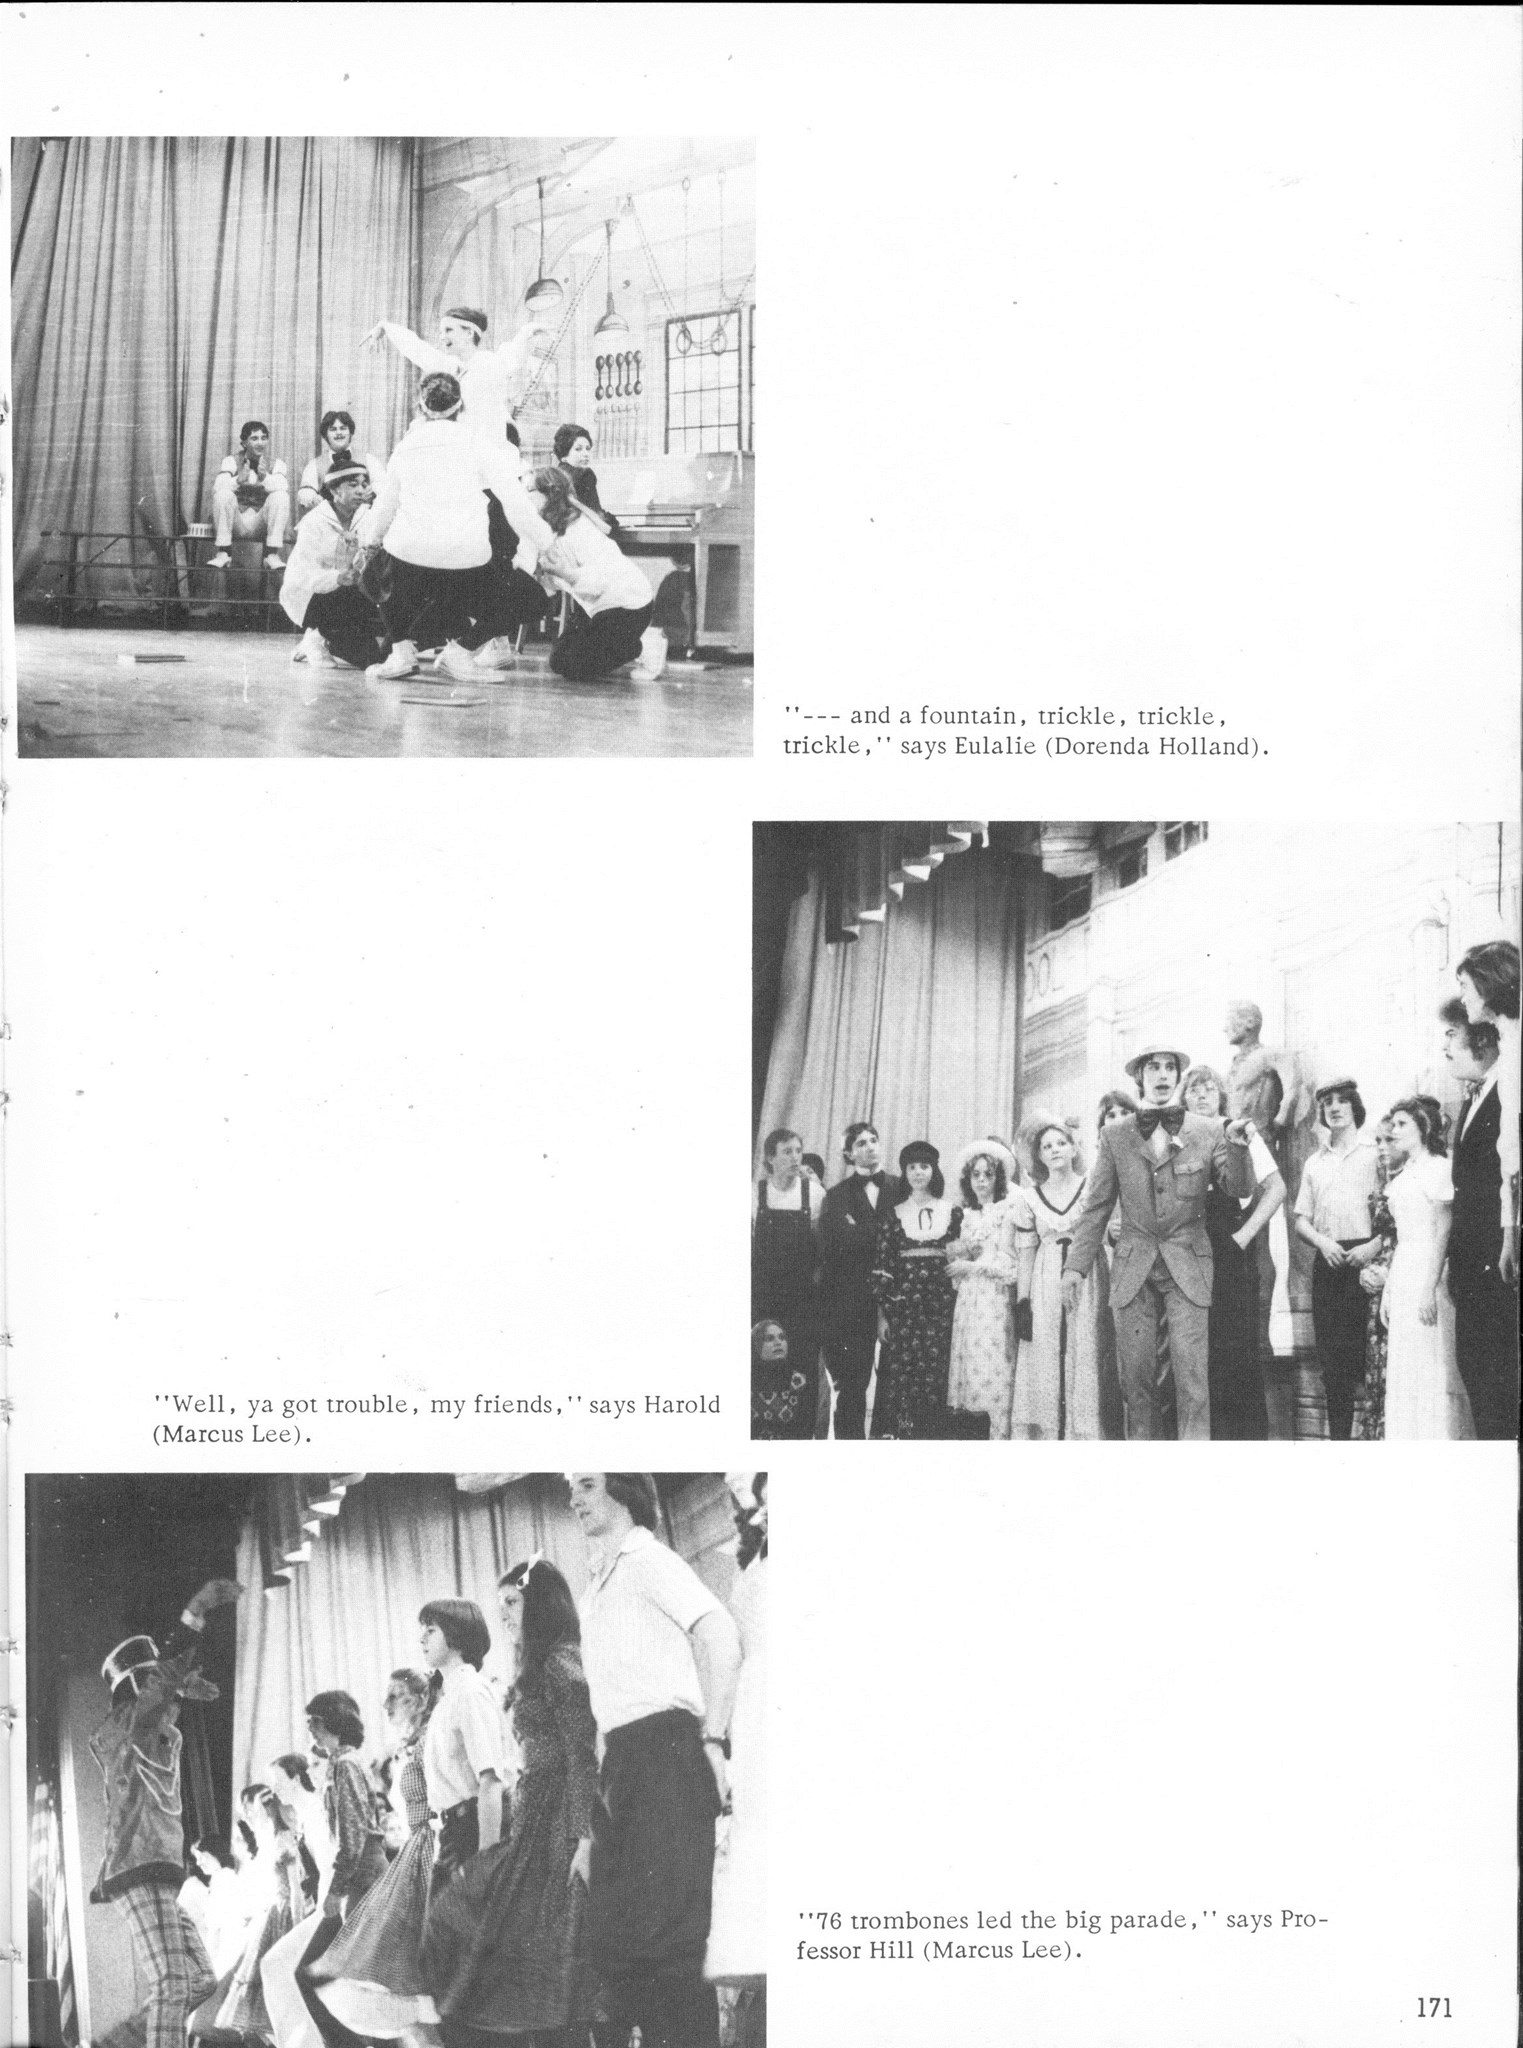 ../../../Images/Large/1976/Arclight-1976-pg0171.jpg